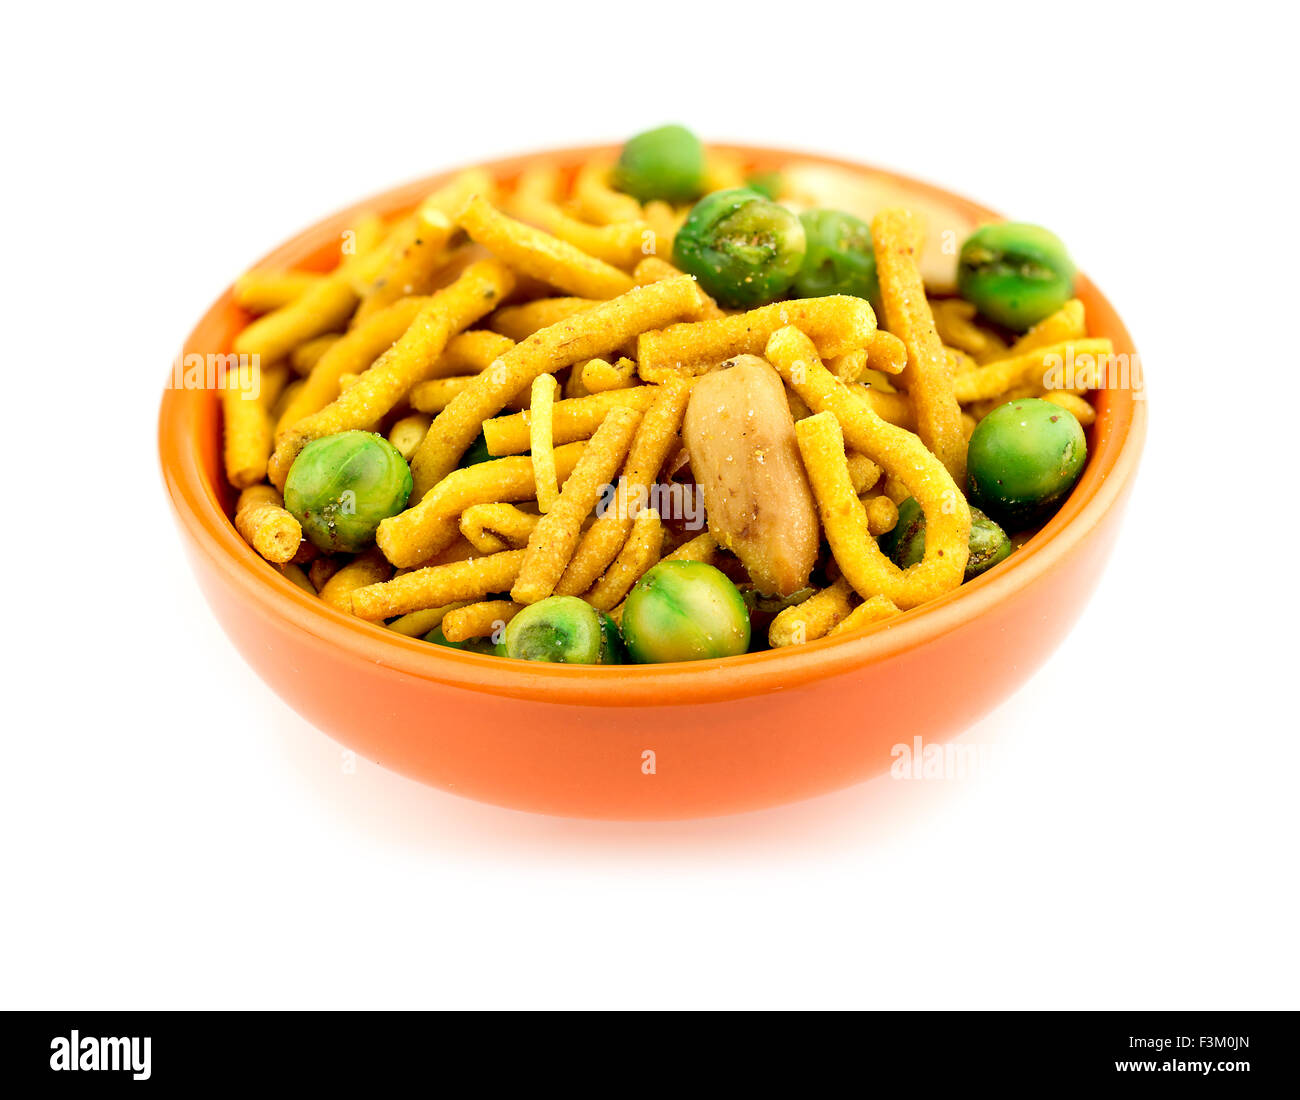 Isolated bowl of Indian bhuja snack on white Stock Photo